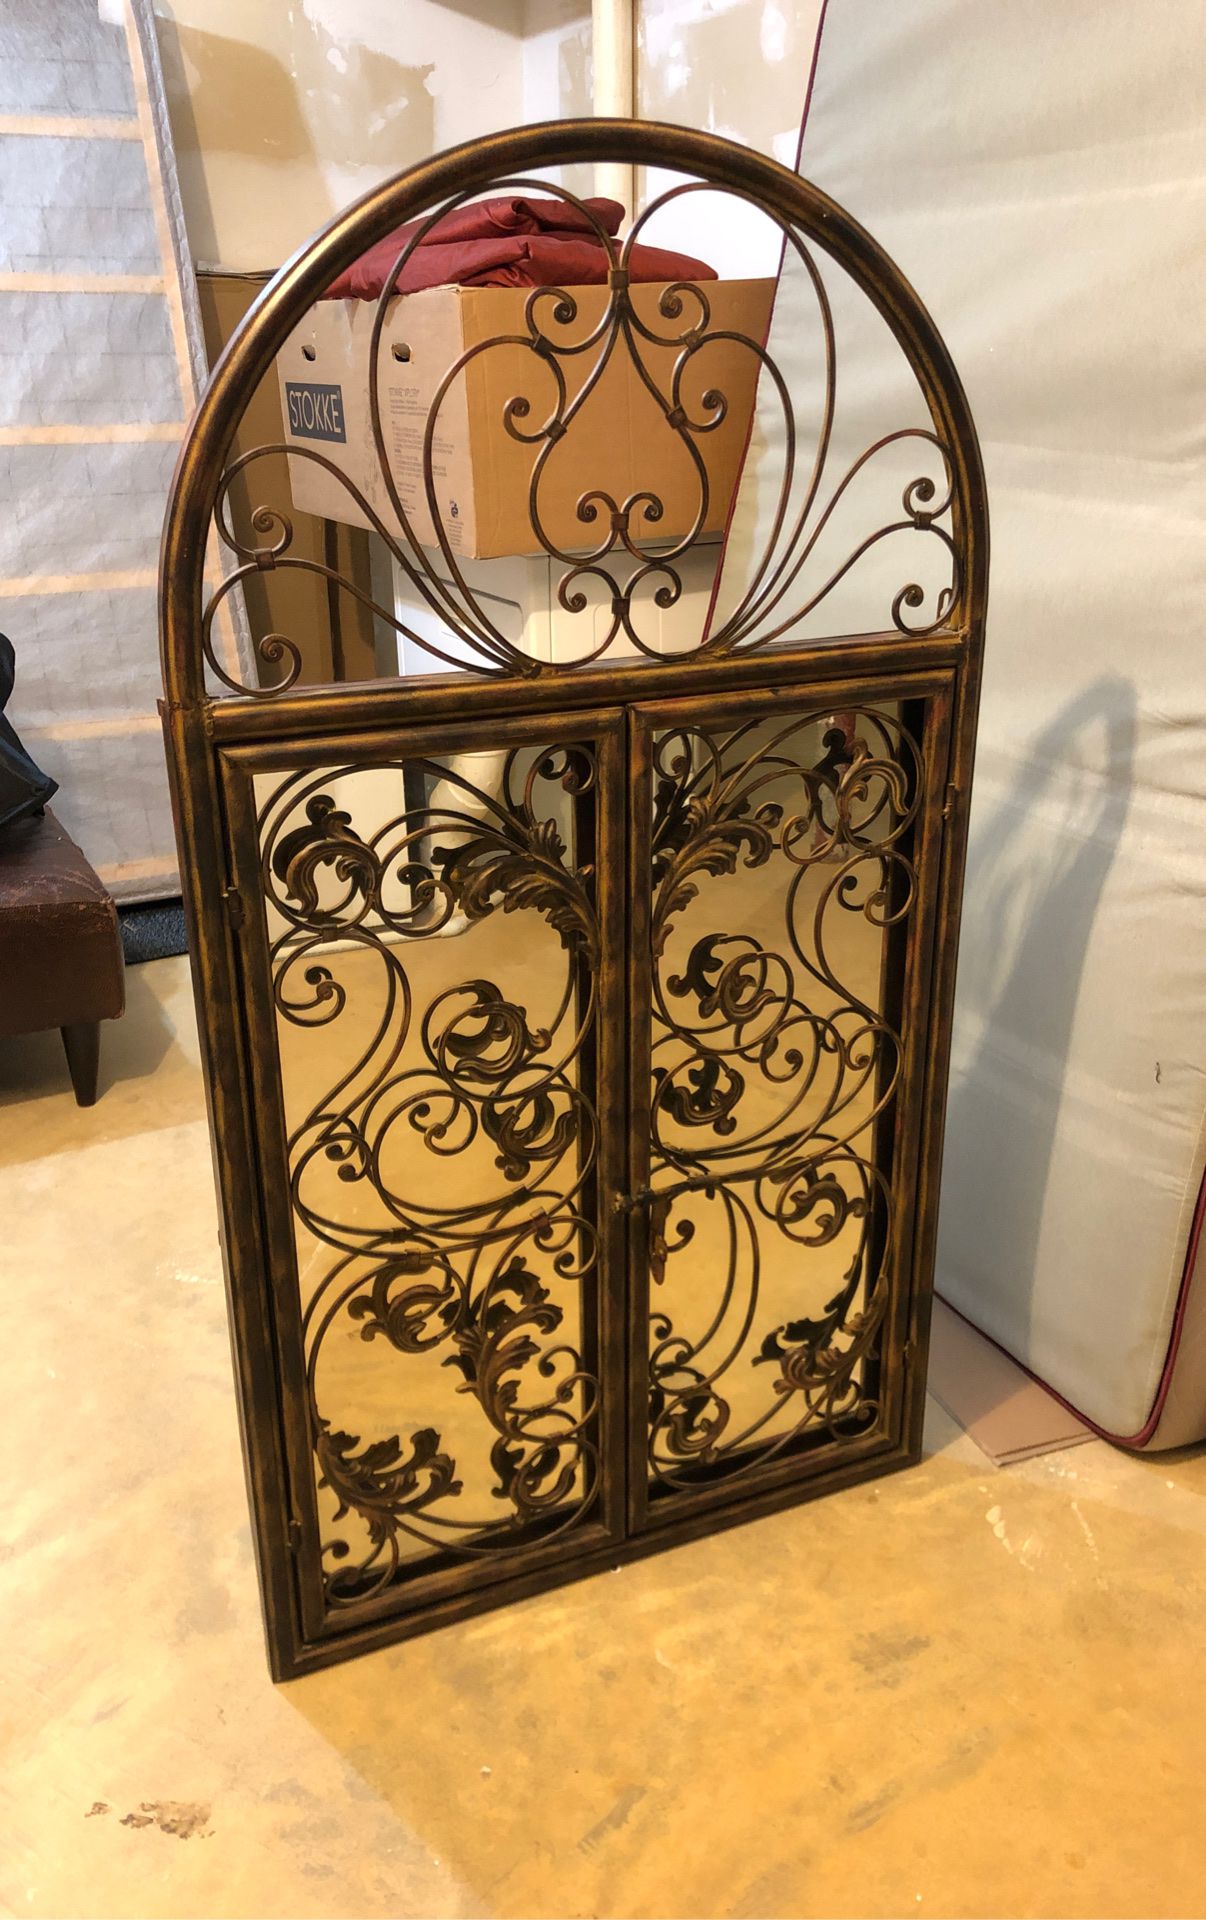 Decorative mirror with metal frame and swinging doors